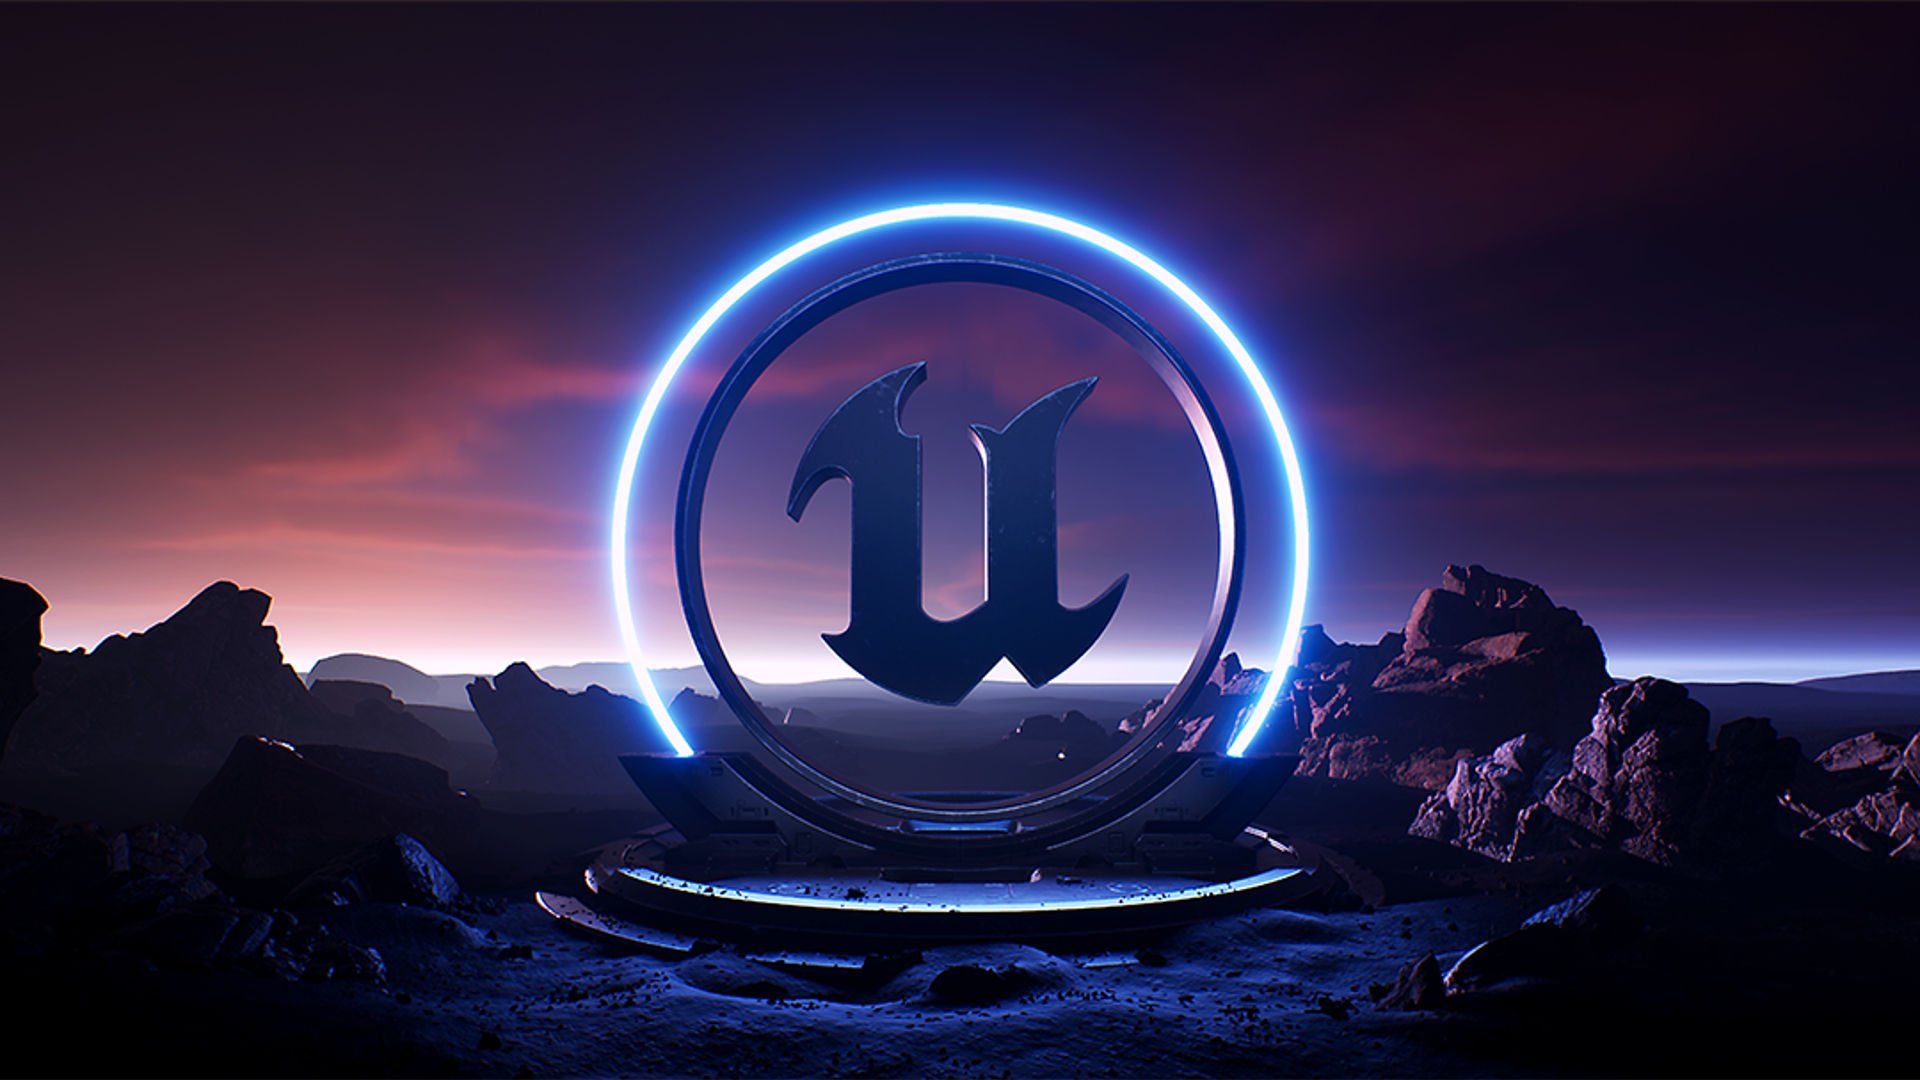 Epic Games Launches Unreal Engine 5: New Features And How To Download It